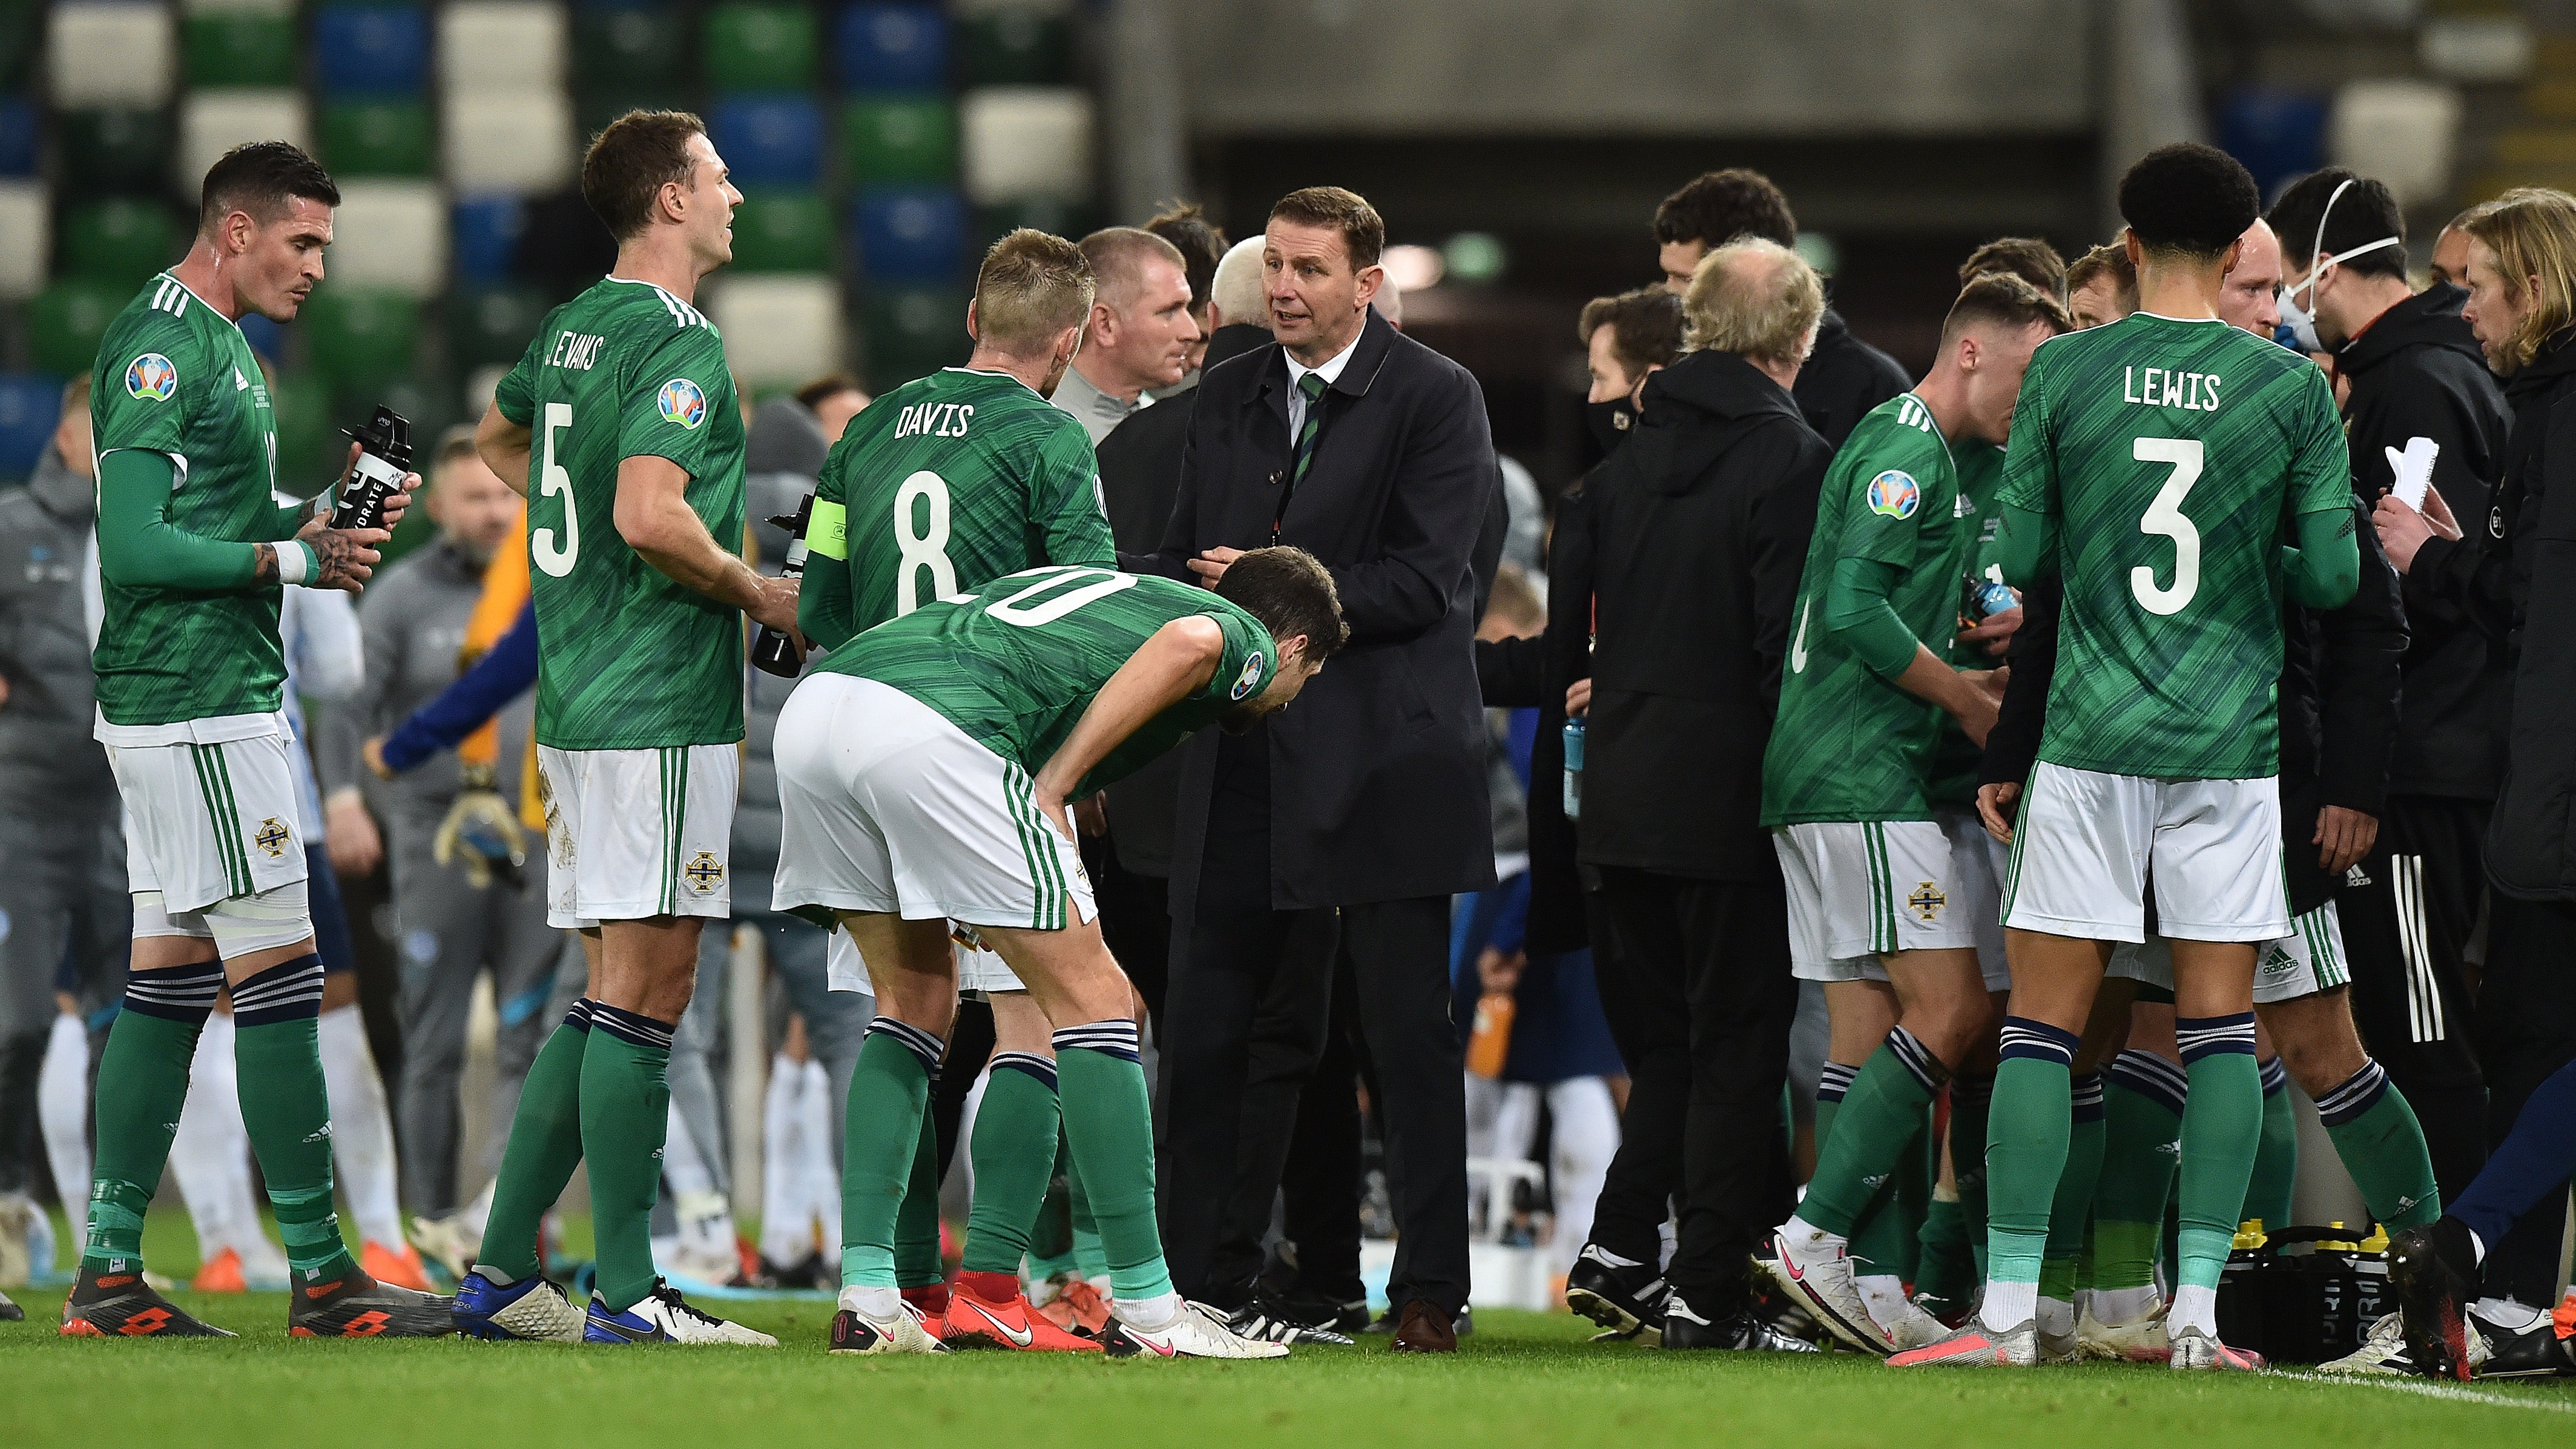 Northern Ireland are looking to build momentum under Ian Baraclough